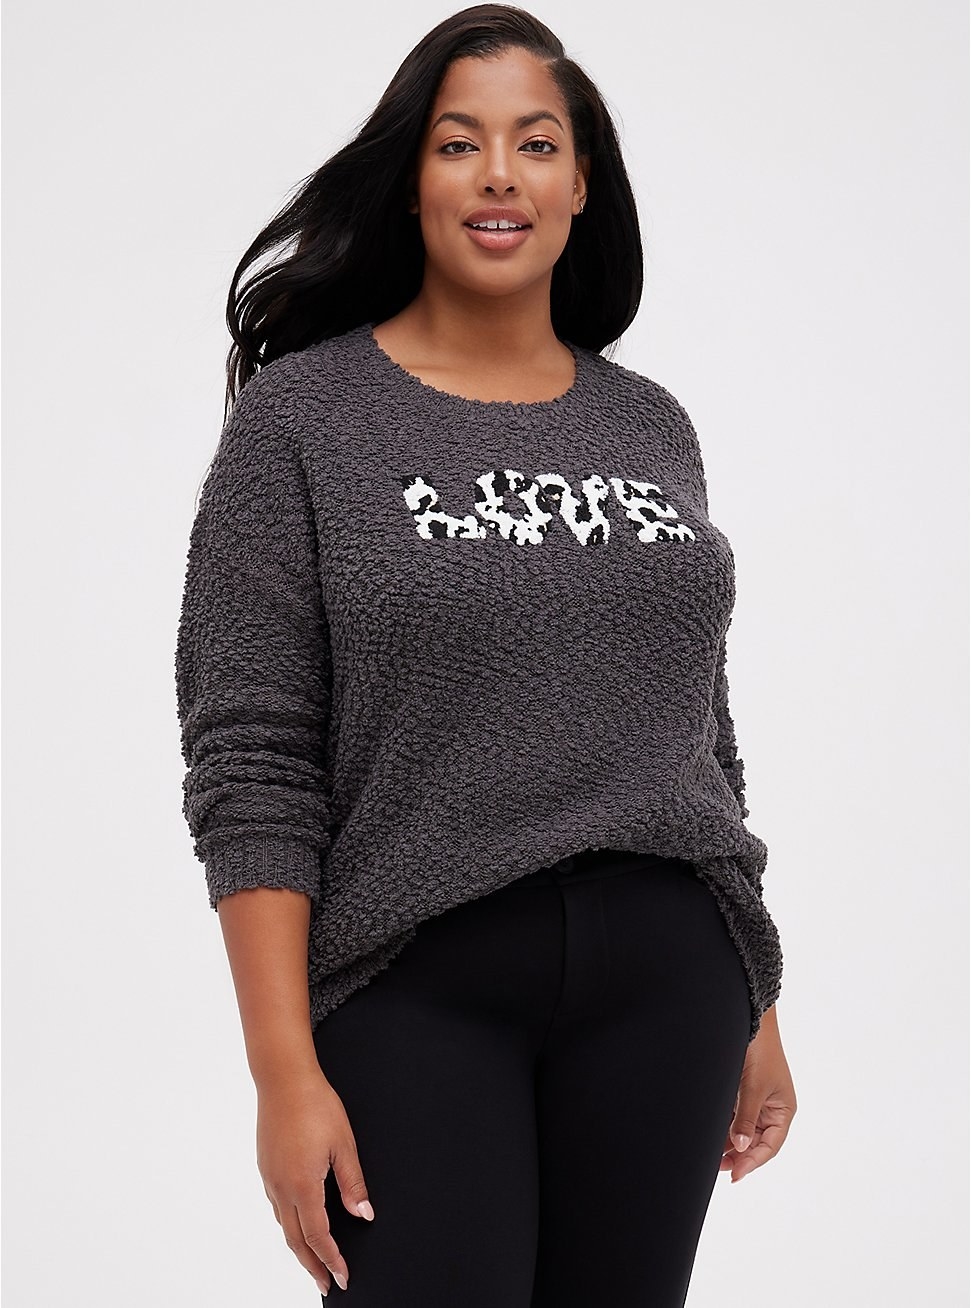 A model wearing the gray Love sweater slightly tucked into a pair of black jeans